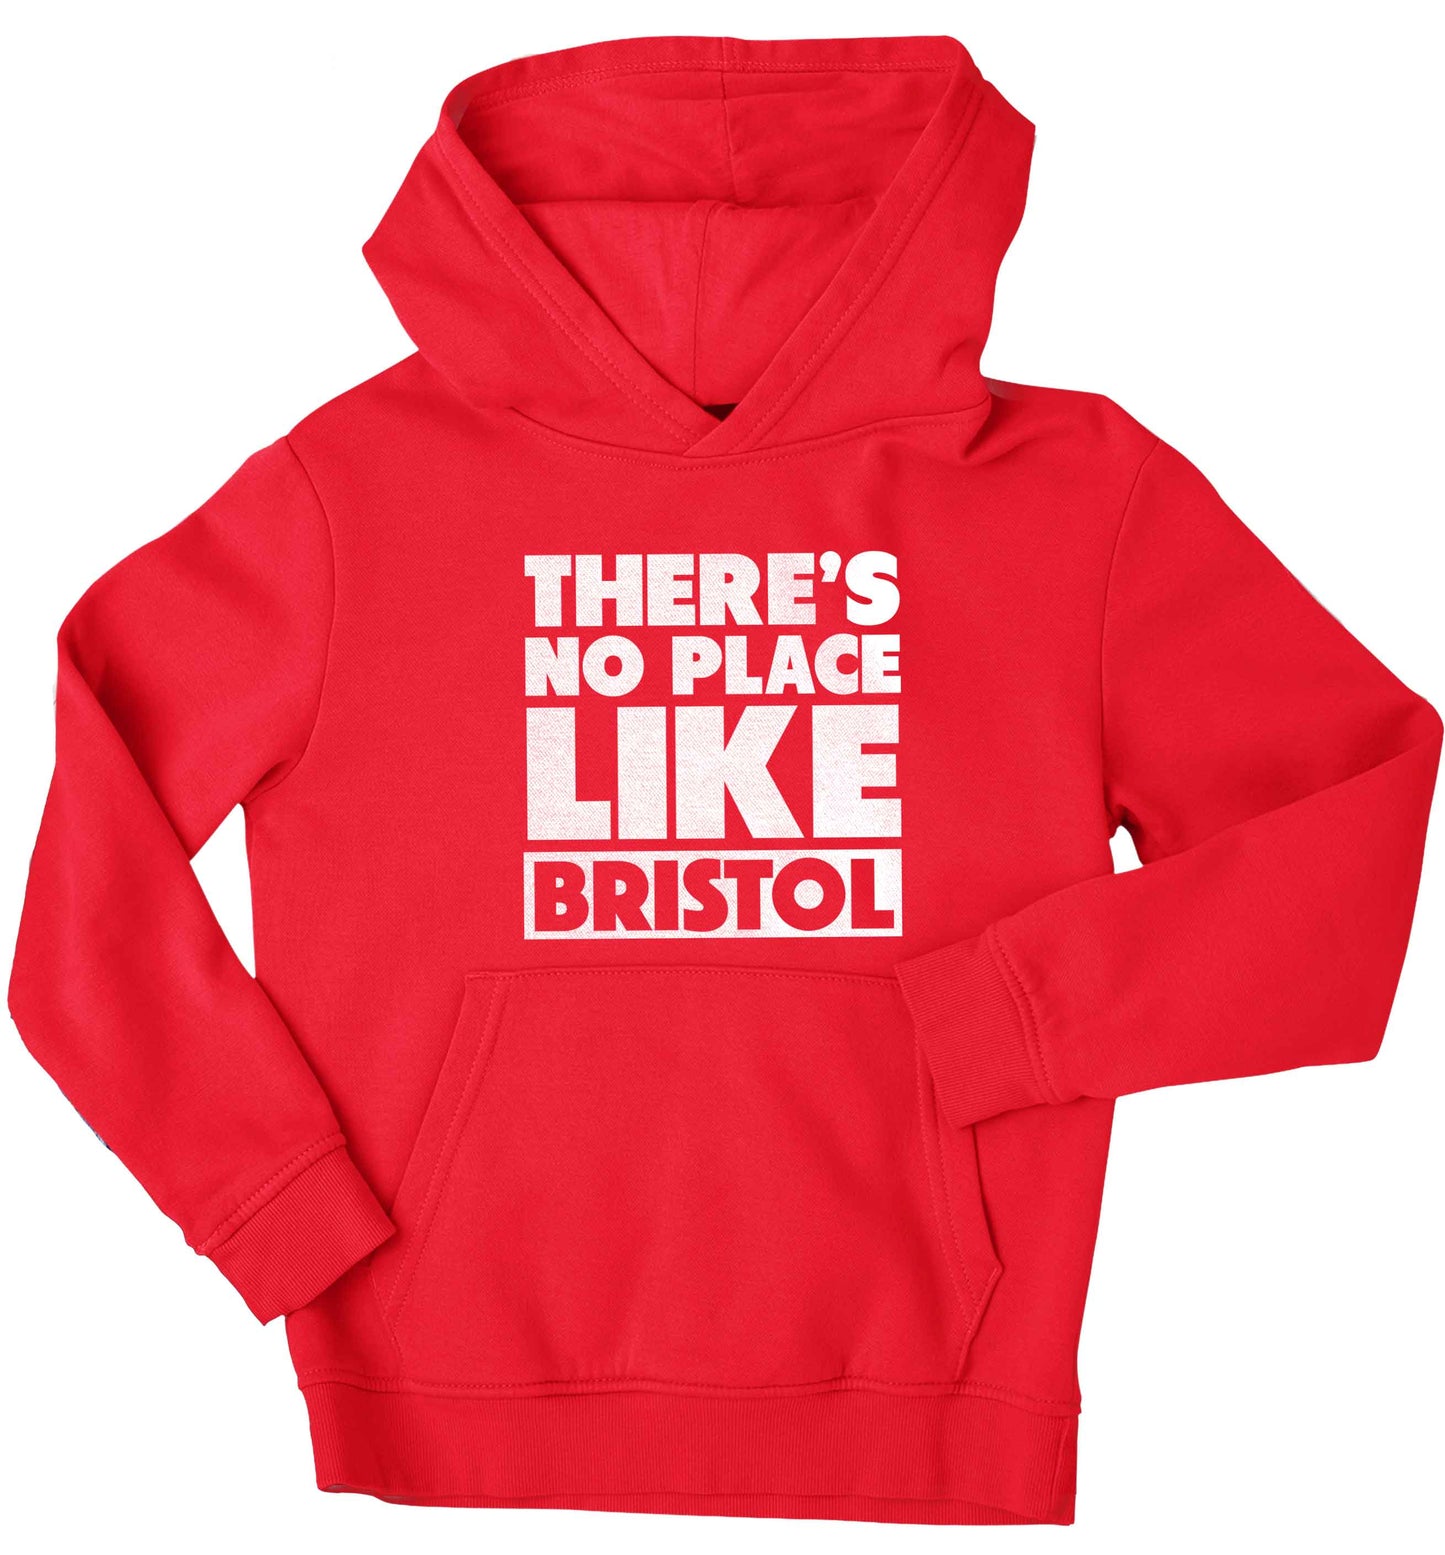 There's no place like Bristol children's red hoodie 12-13 Years